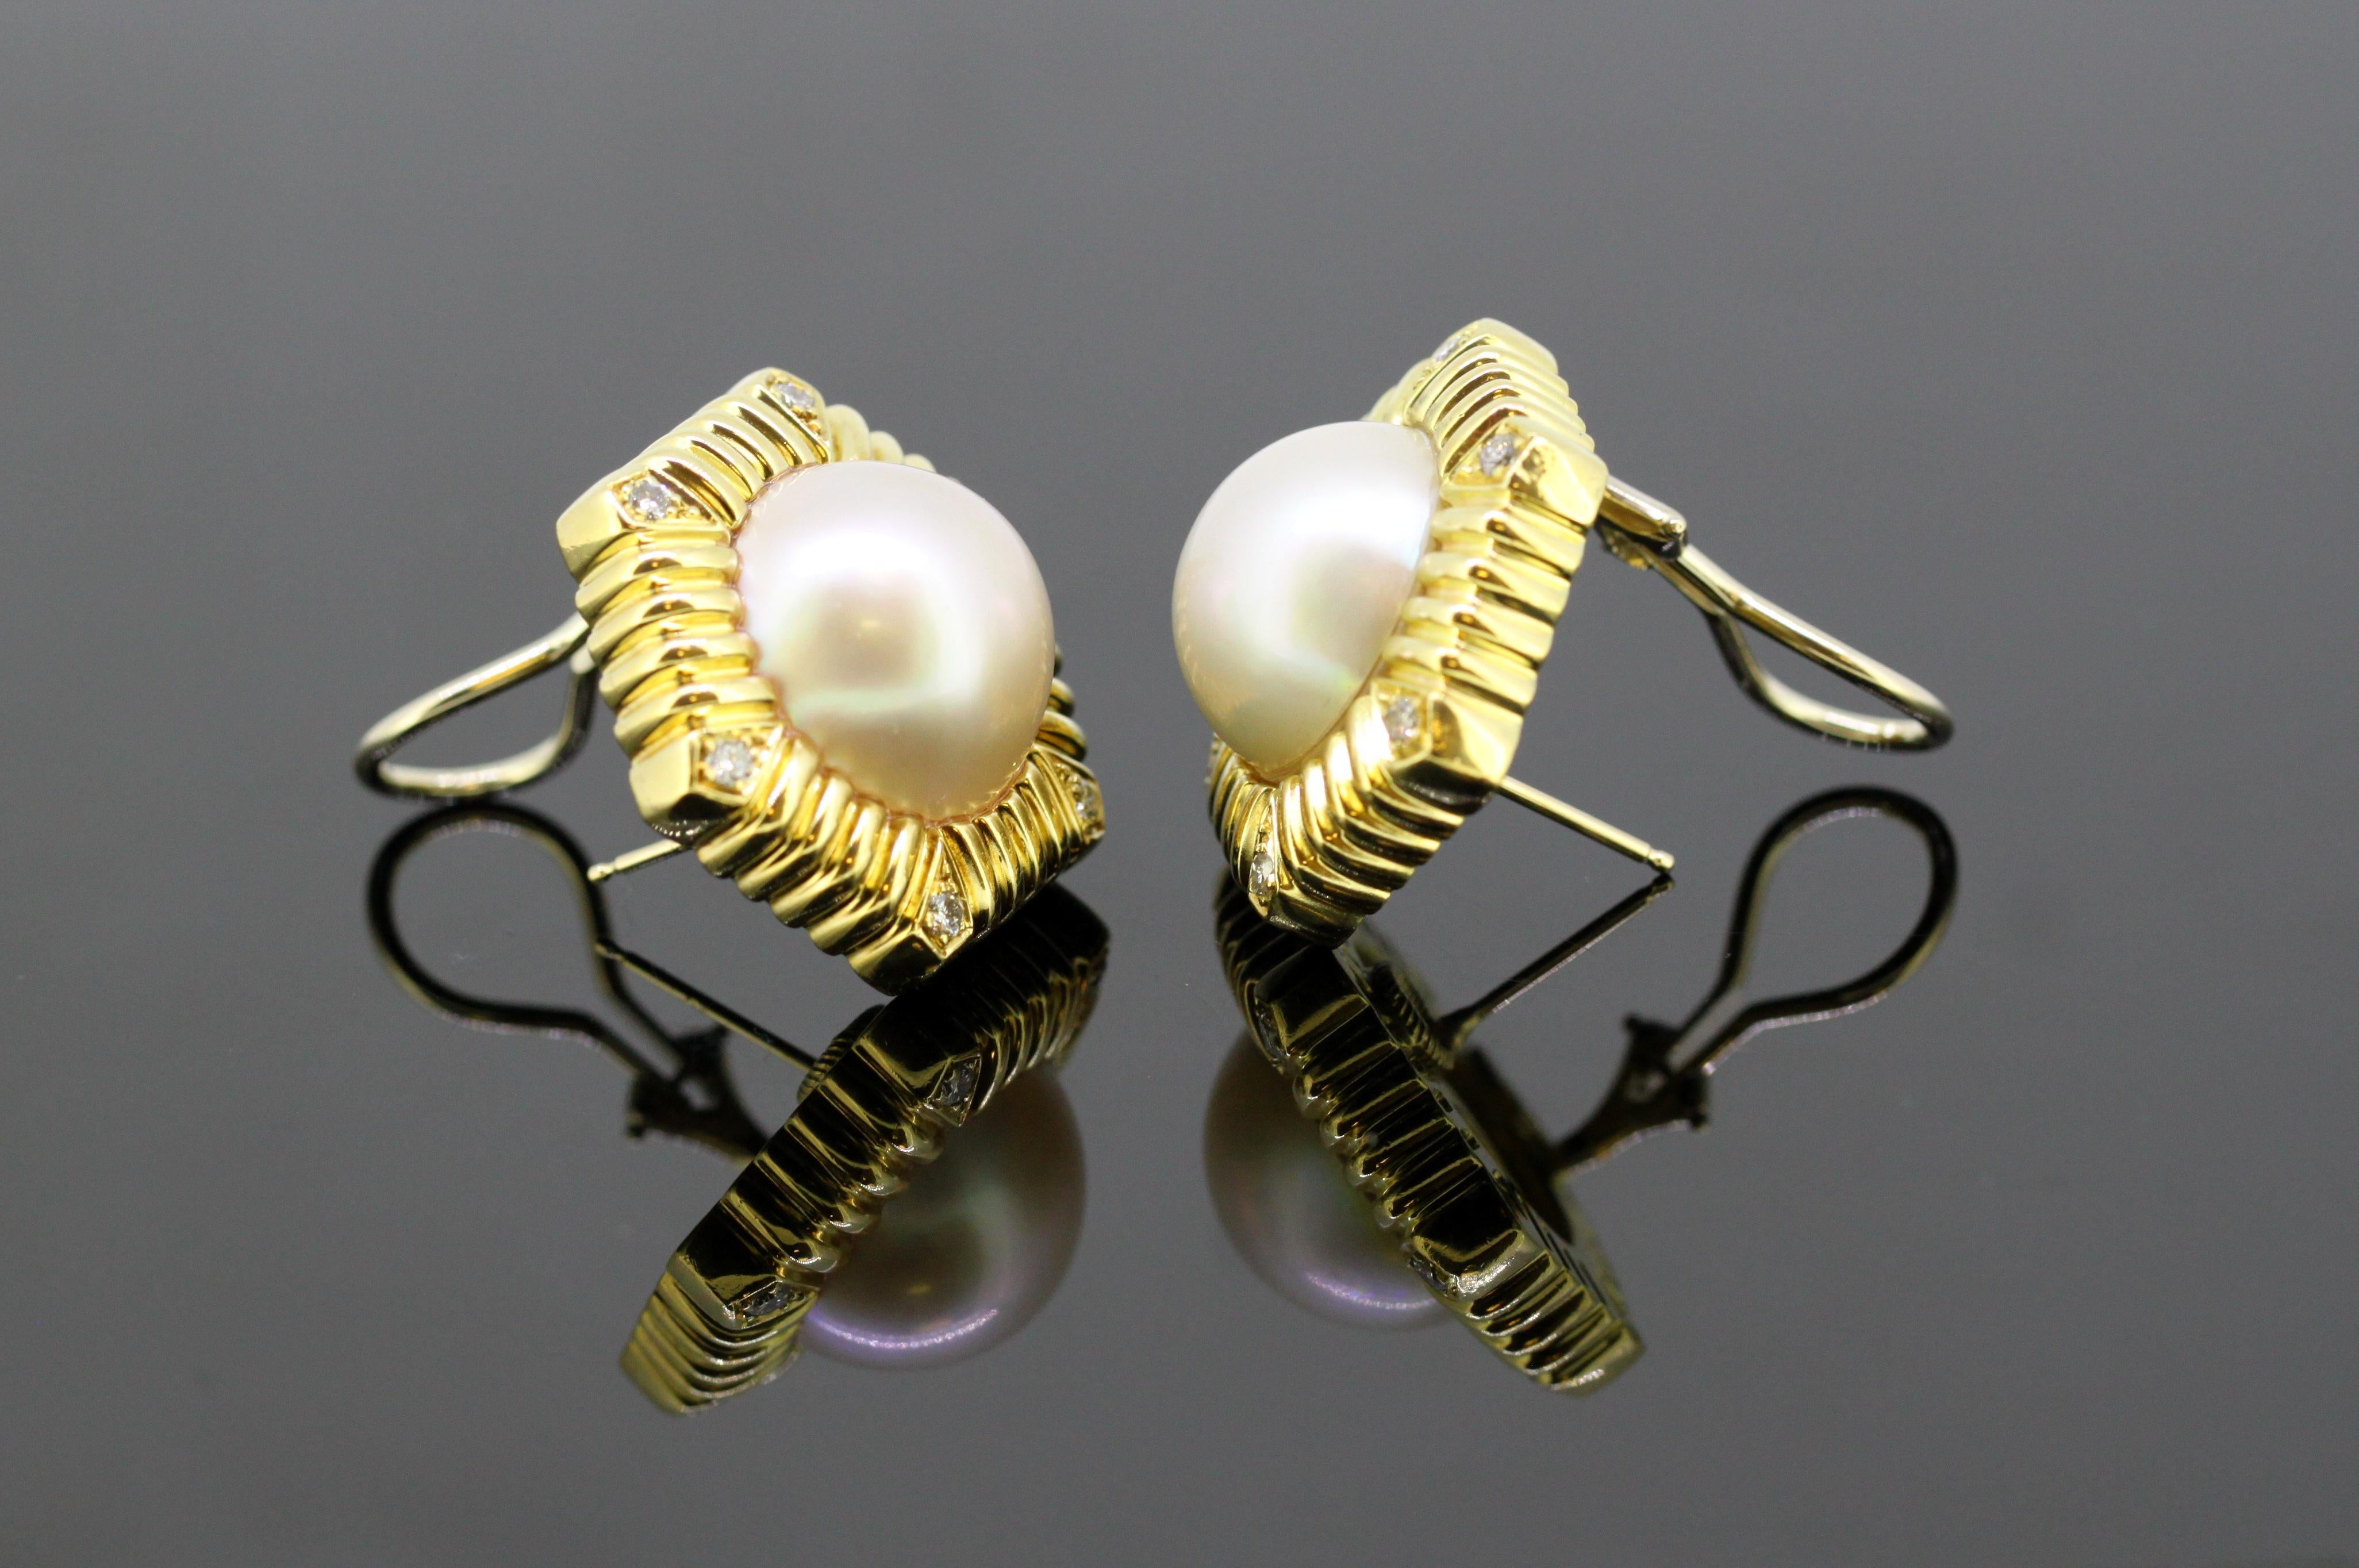 18k yellow gold ladies clip-on earrings with south sea pearls and diamonds. 
Designe : Bvcciari 
Made in : USA Circa 2000's 
Fully hallmarked 

Dimensions - 
Diameter x Depth : 2.7 x 2.3 cm 
Weight: 32 grams 

South Sea Pearl - 
Number of pearls : 2